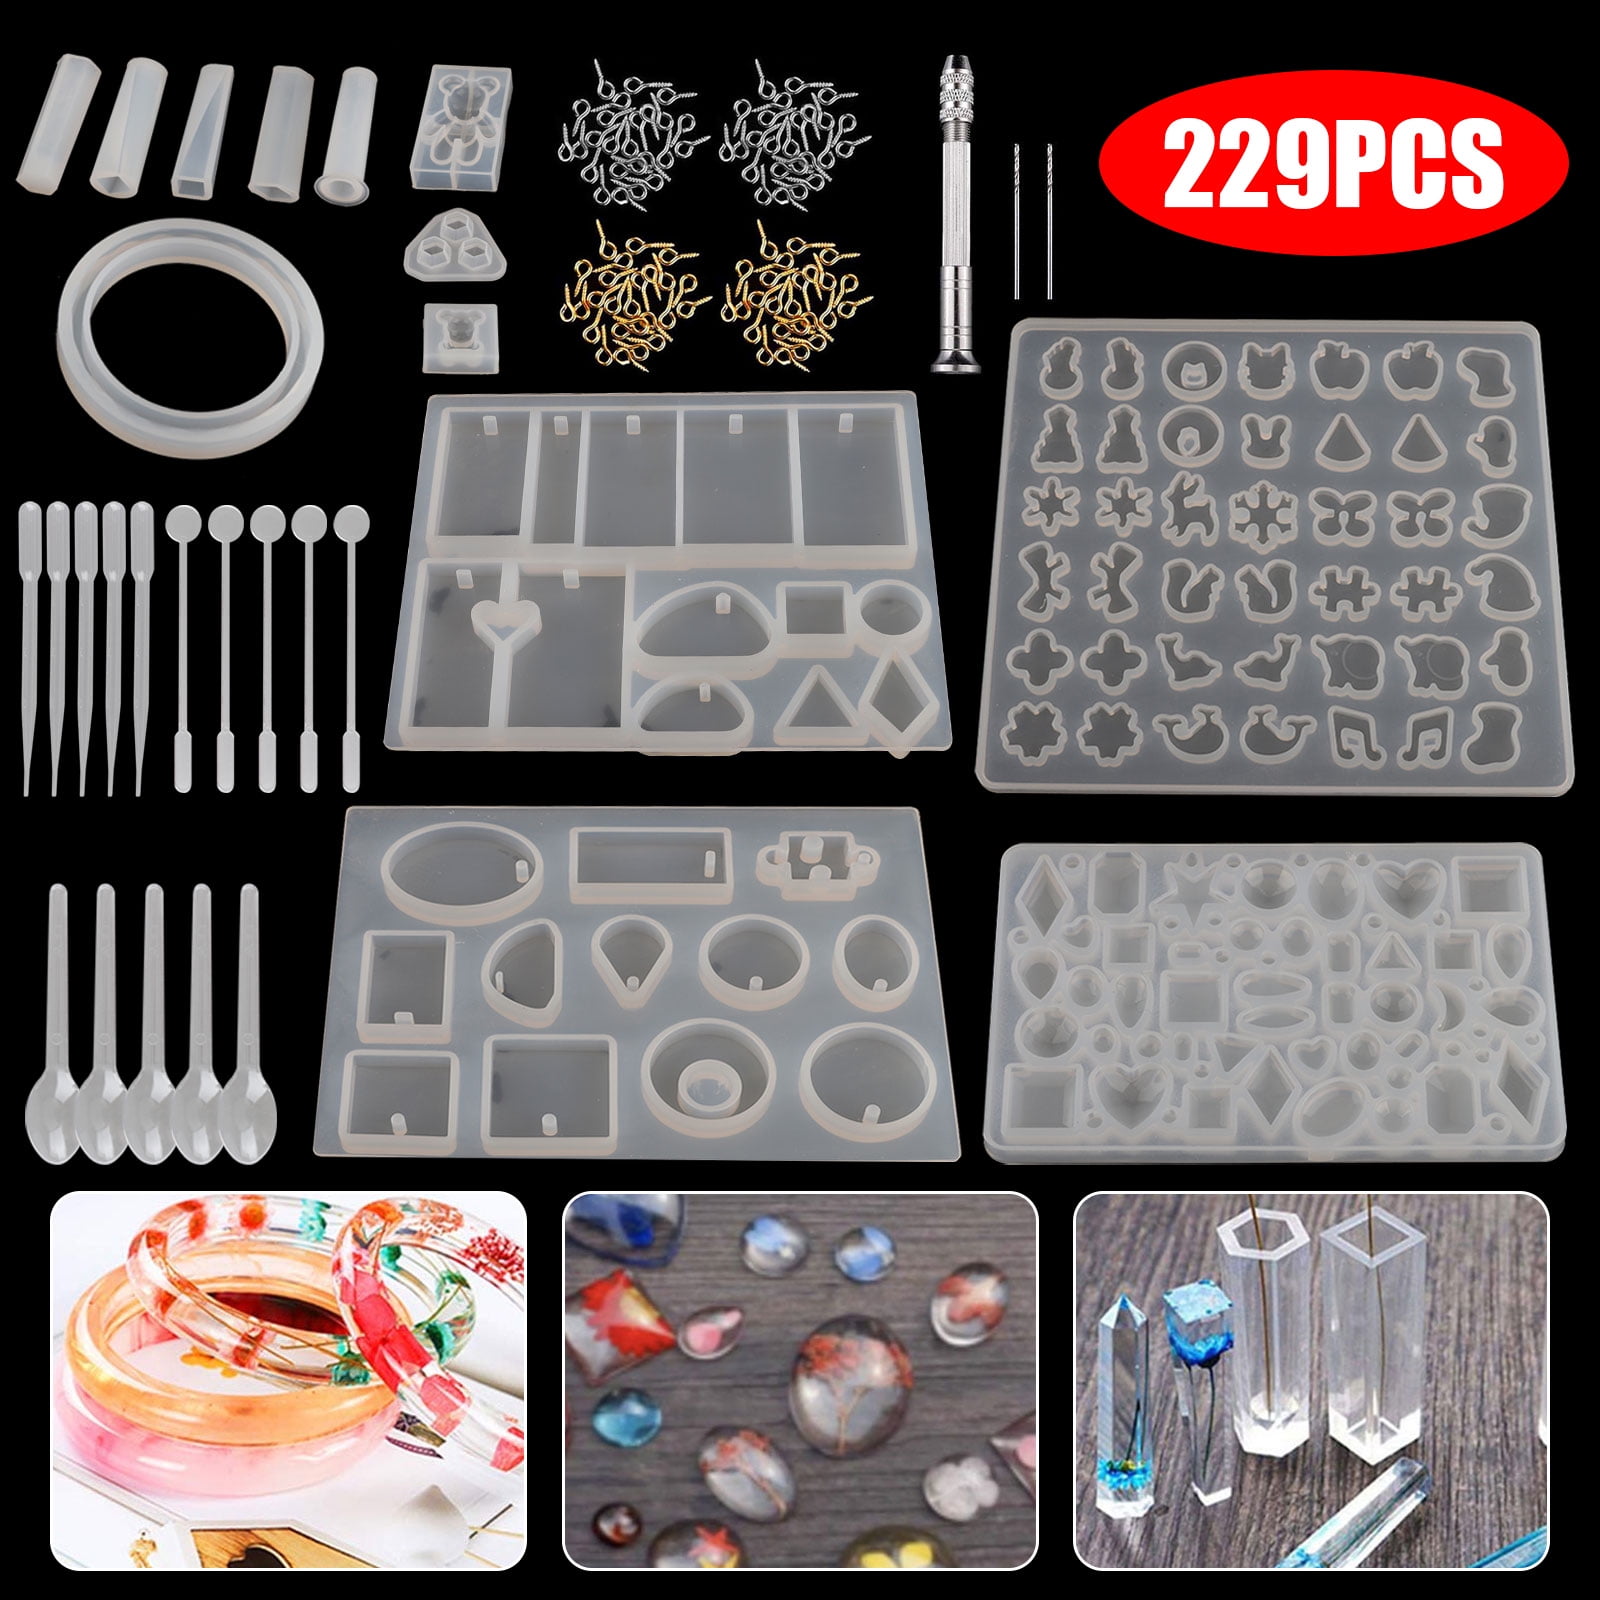 Resin Crafts Resin Craft Supplies Craft Supplies Resin 6 Cavity Bookmark Silicone Mould Resin Art Art Supplies Resin Mold